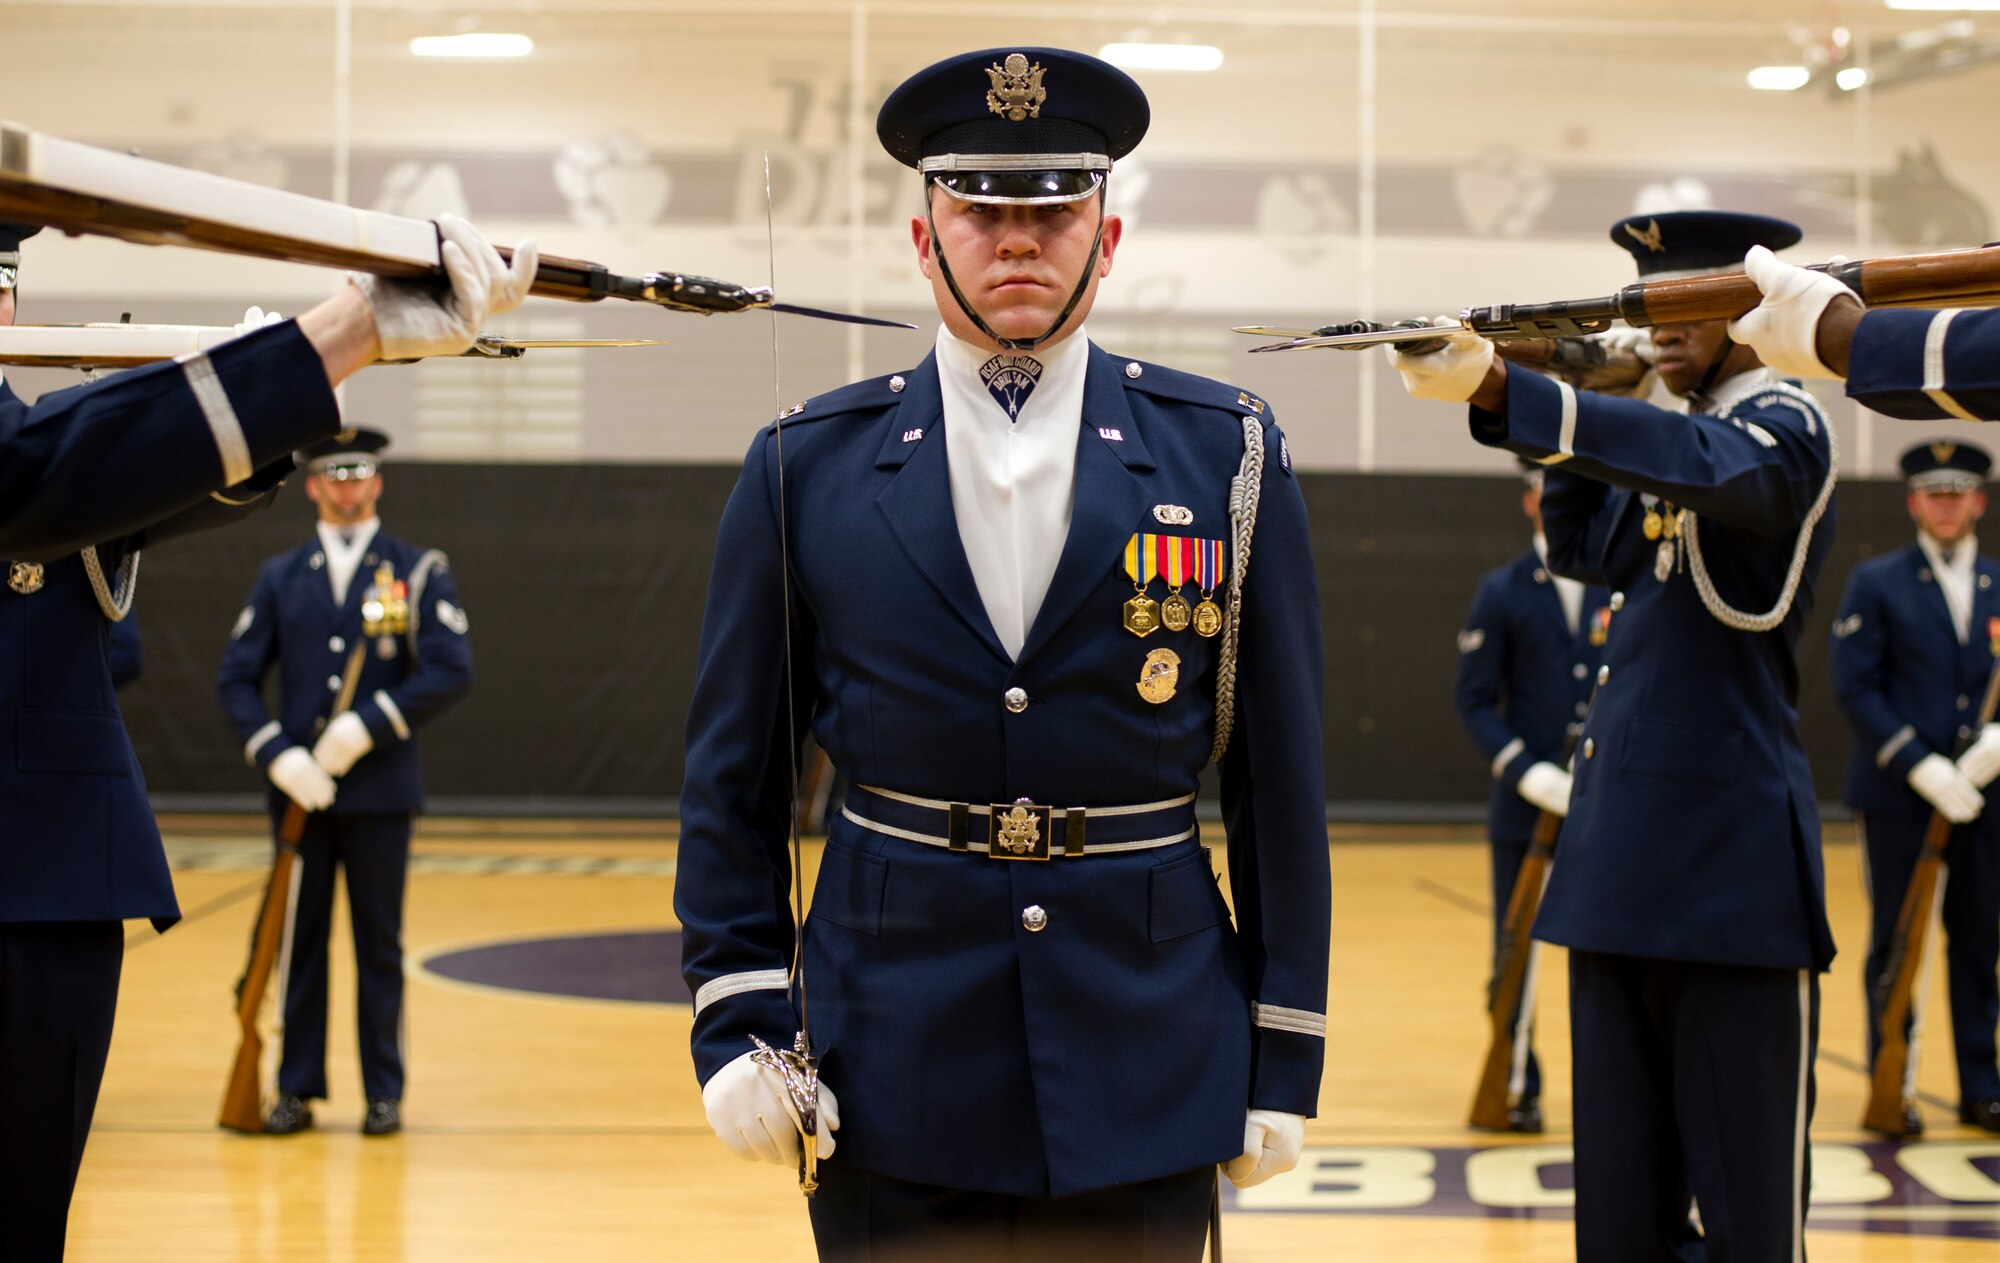 Capt. Alexander Stanton, U.S. Air Force Honor Guard Drill Team commander, stands at attention as four drill team members point their bayonets toward him during a performance Feb. 6, 2013 at Battlefield High School in Haymarket, Va. The performance was Stanton’s final performance with the Drill Team. (U.S. Air Force photo/ Senior Airman Bahja Joi Jones)